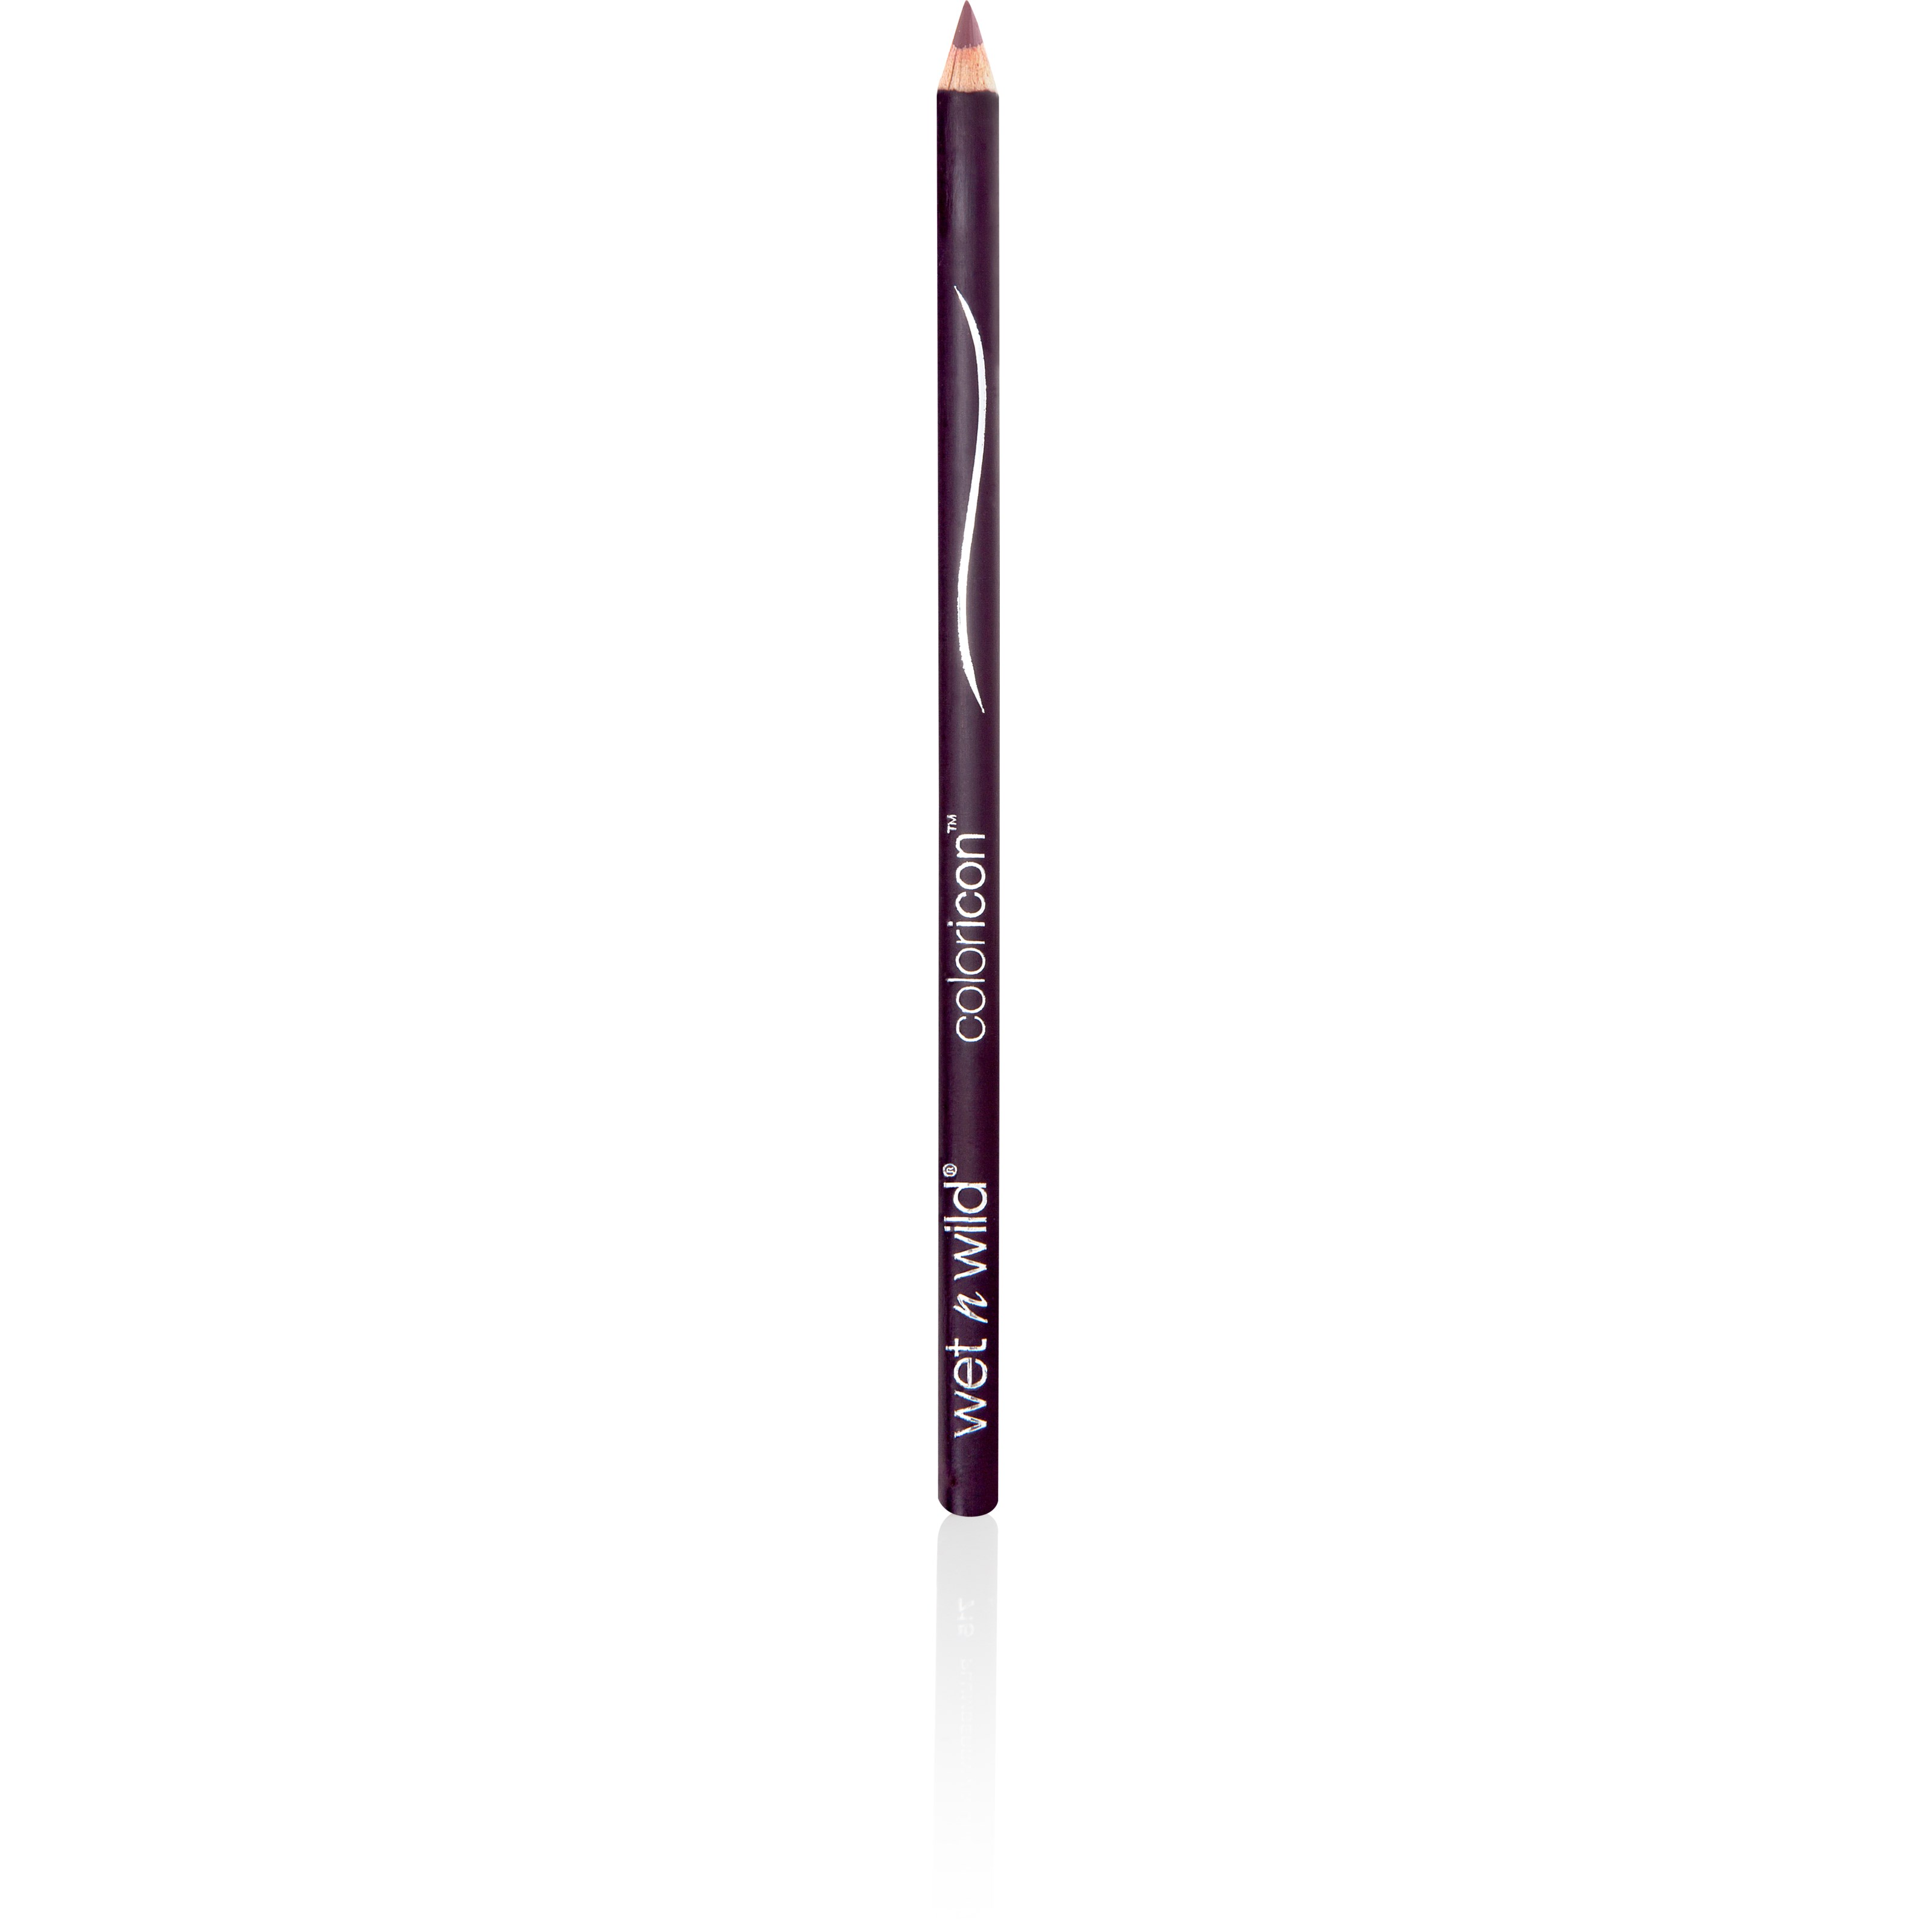 Wet n Wild Color Icon Lipliner Pencil Plumberry